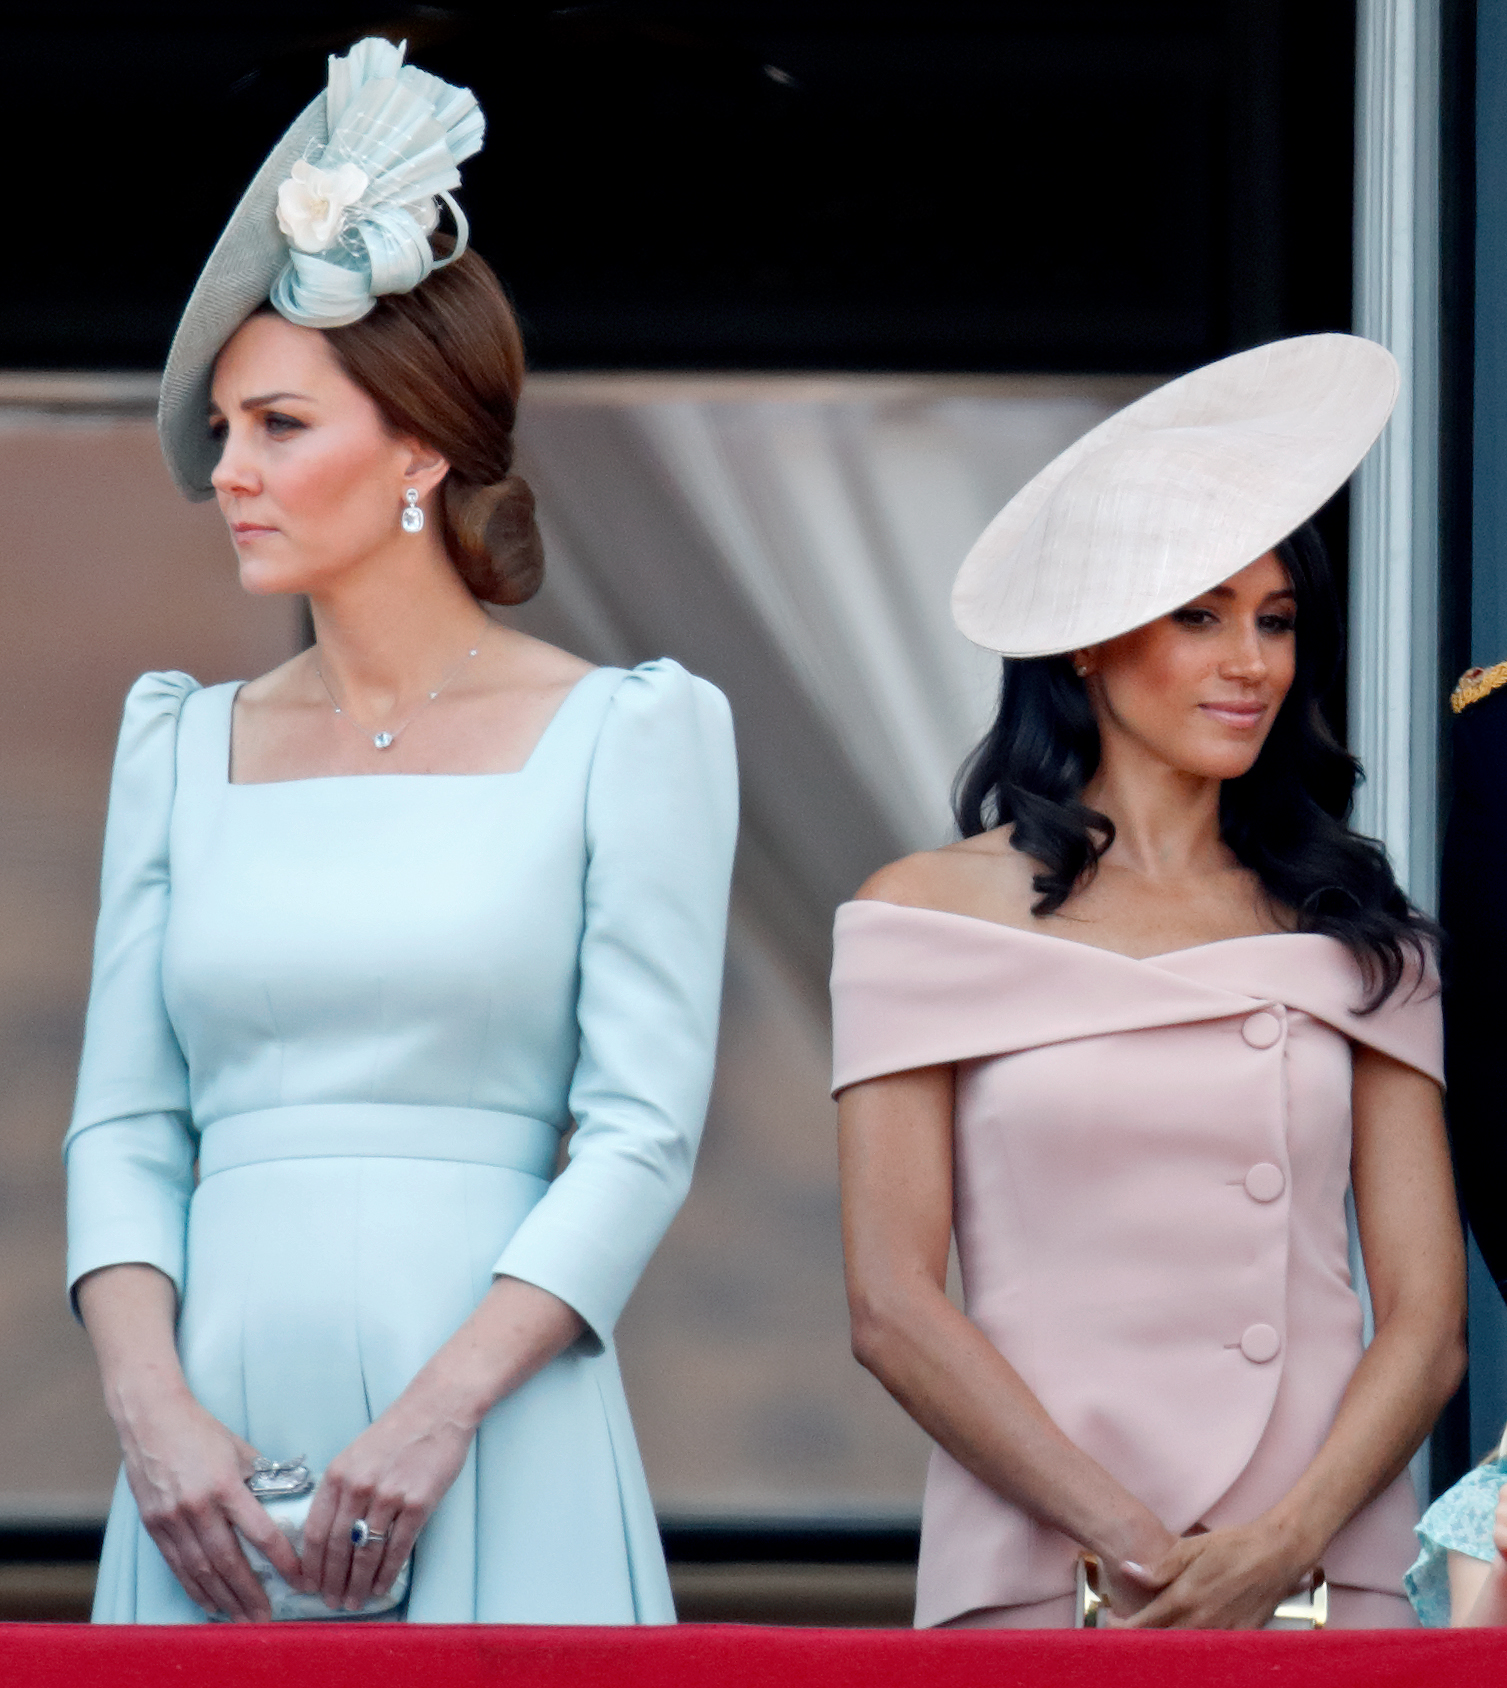 Meghan, Duchess of Sussex and the Princess of Wales, Kate at Buckingham Palace in 2018 | Source: Getty Images